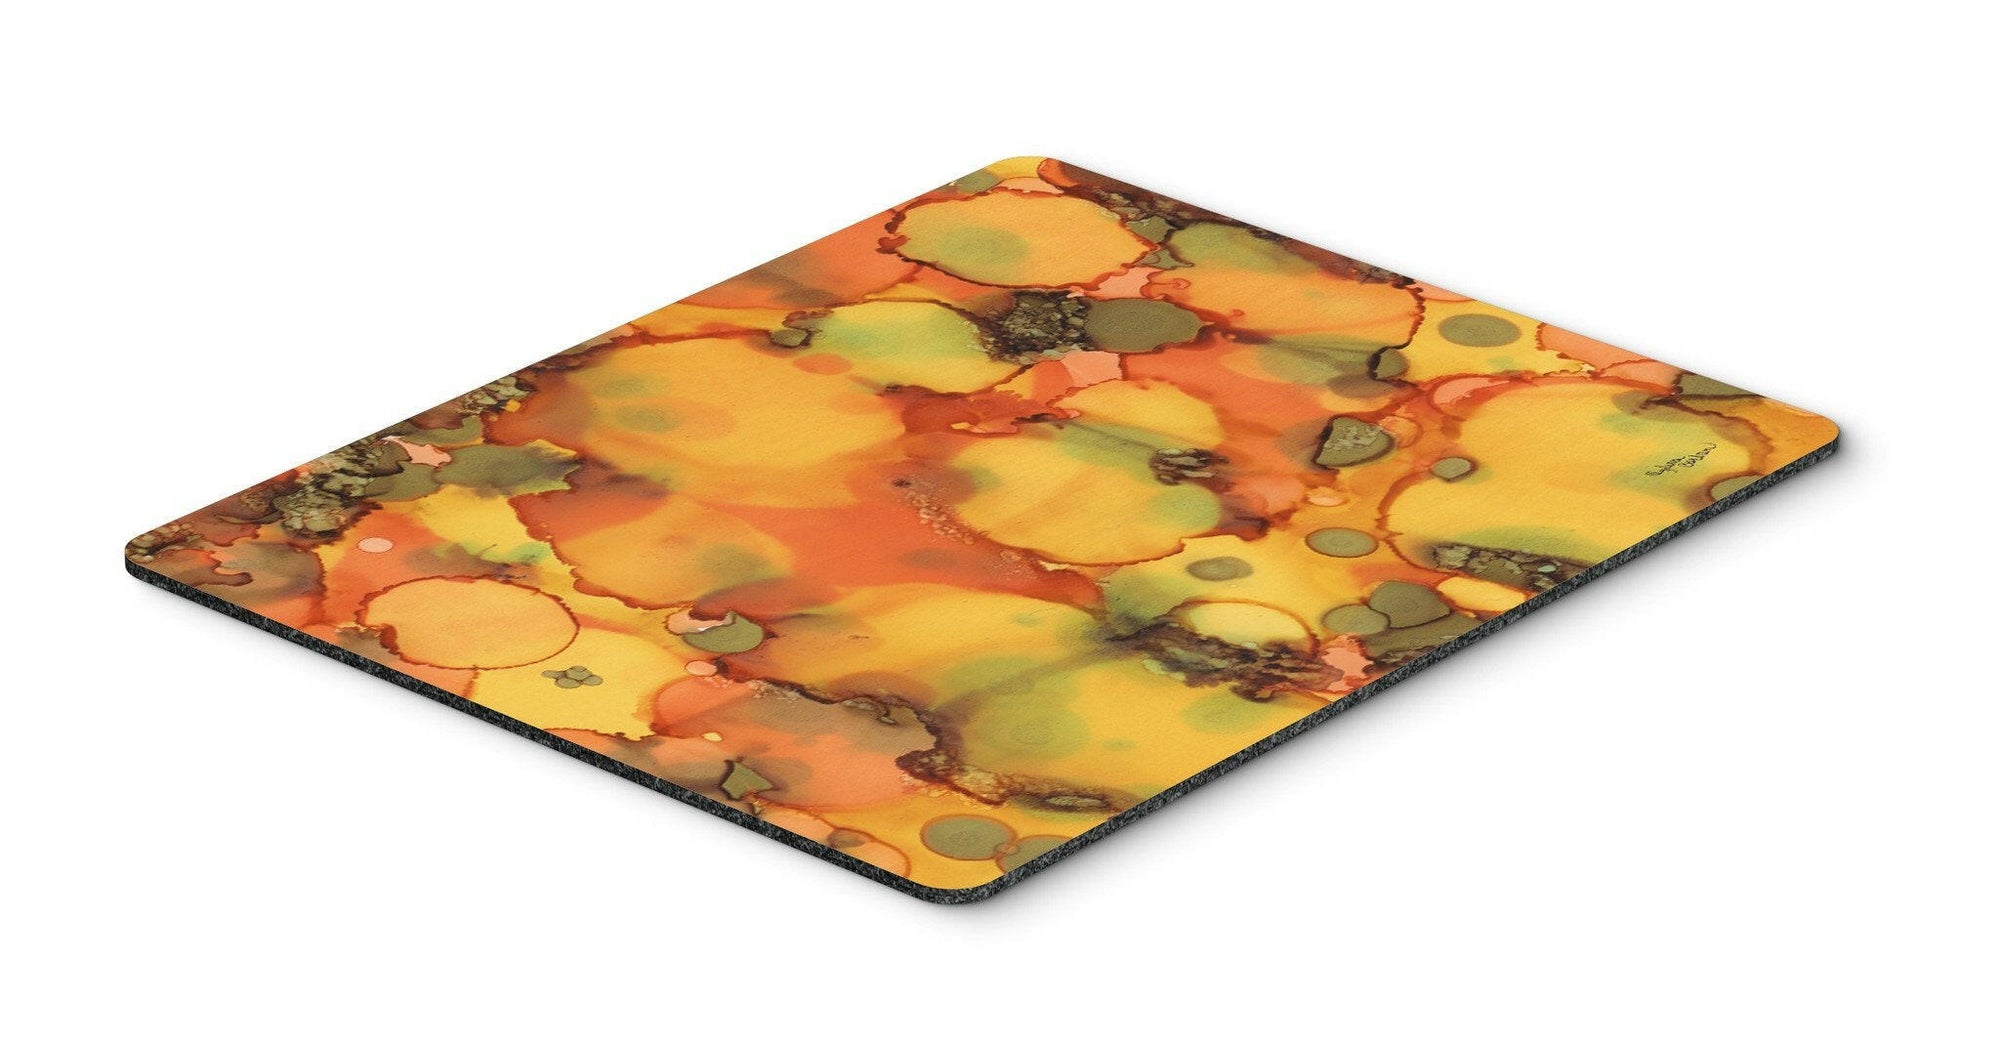 Abstract in Orange and Greens Mouse Pad, Hot Pad or Trivet 8976MP by Caroline's Treasures